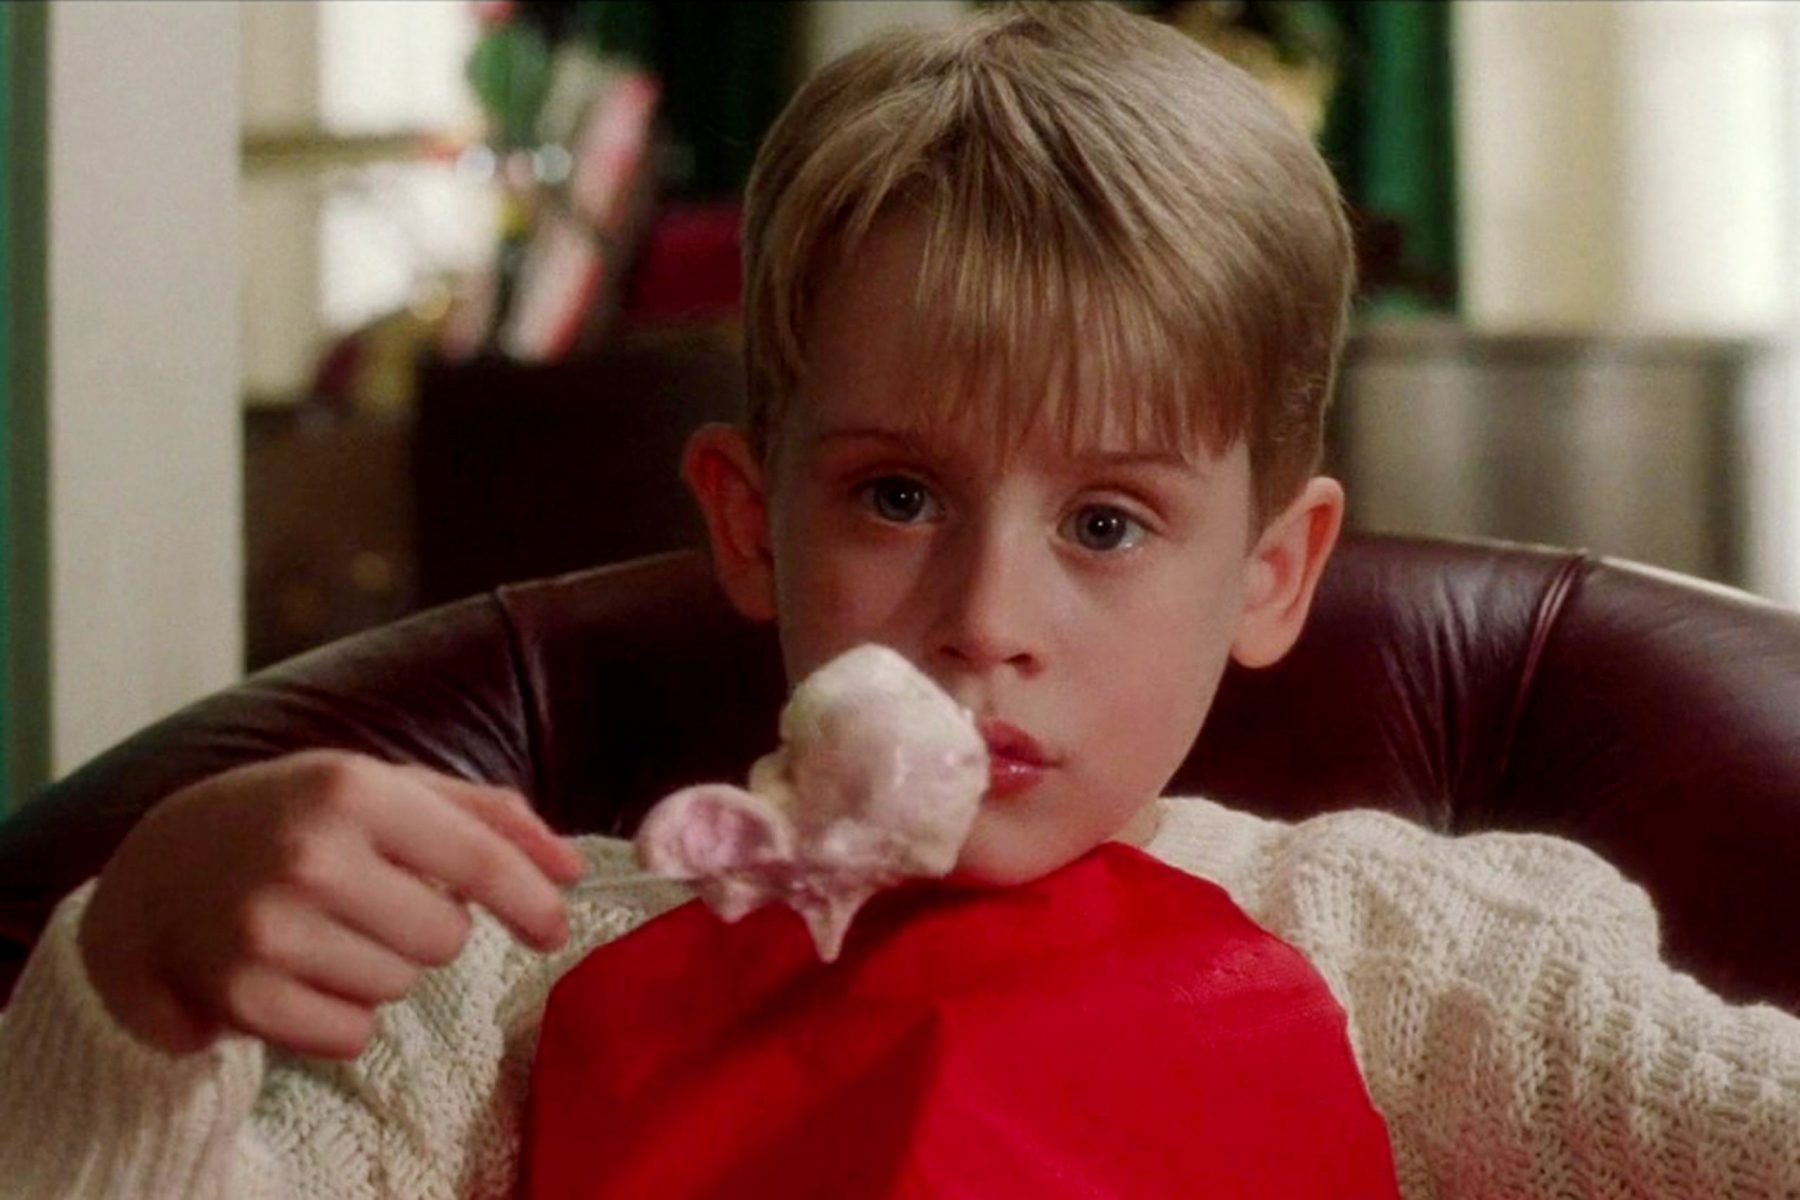 In article about Christmas movies, a screenshot from Home Alone